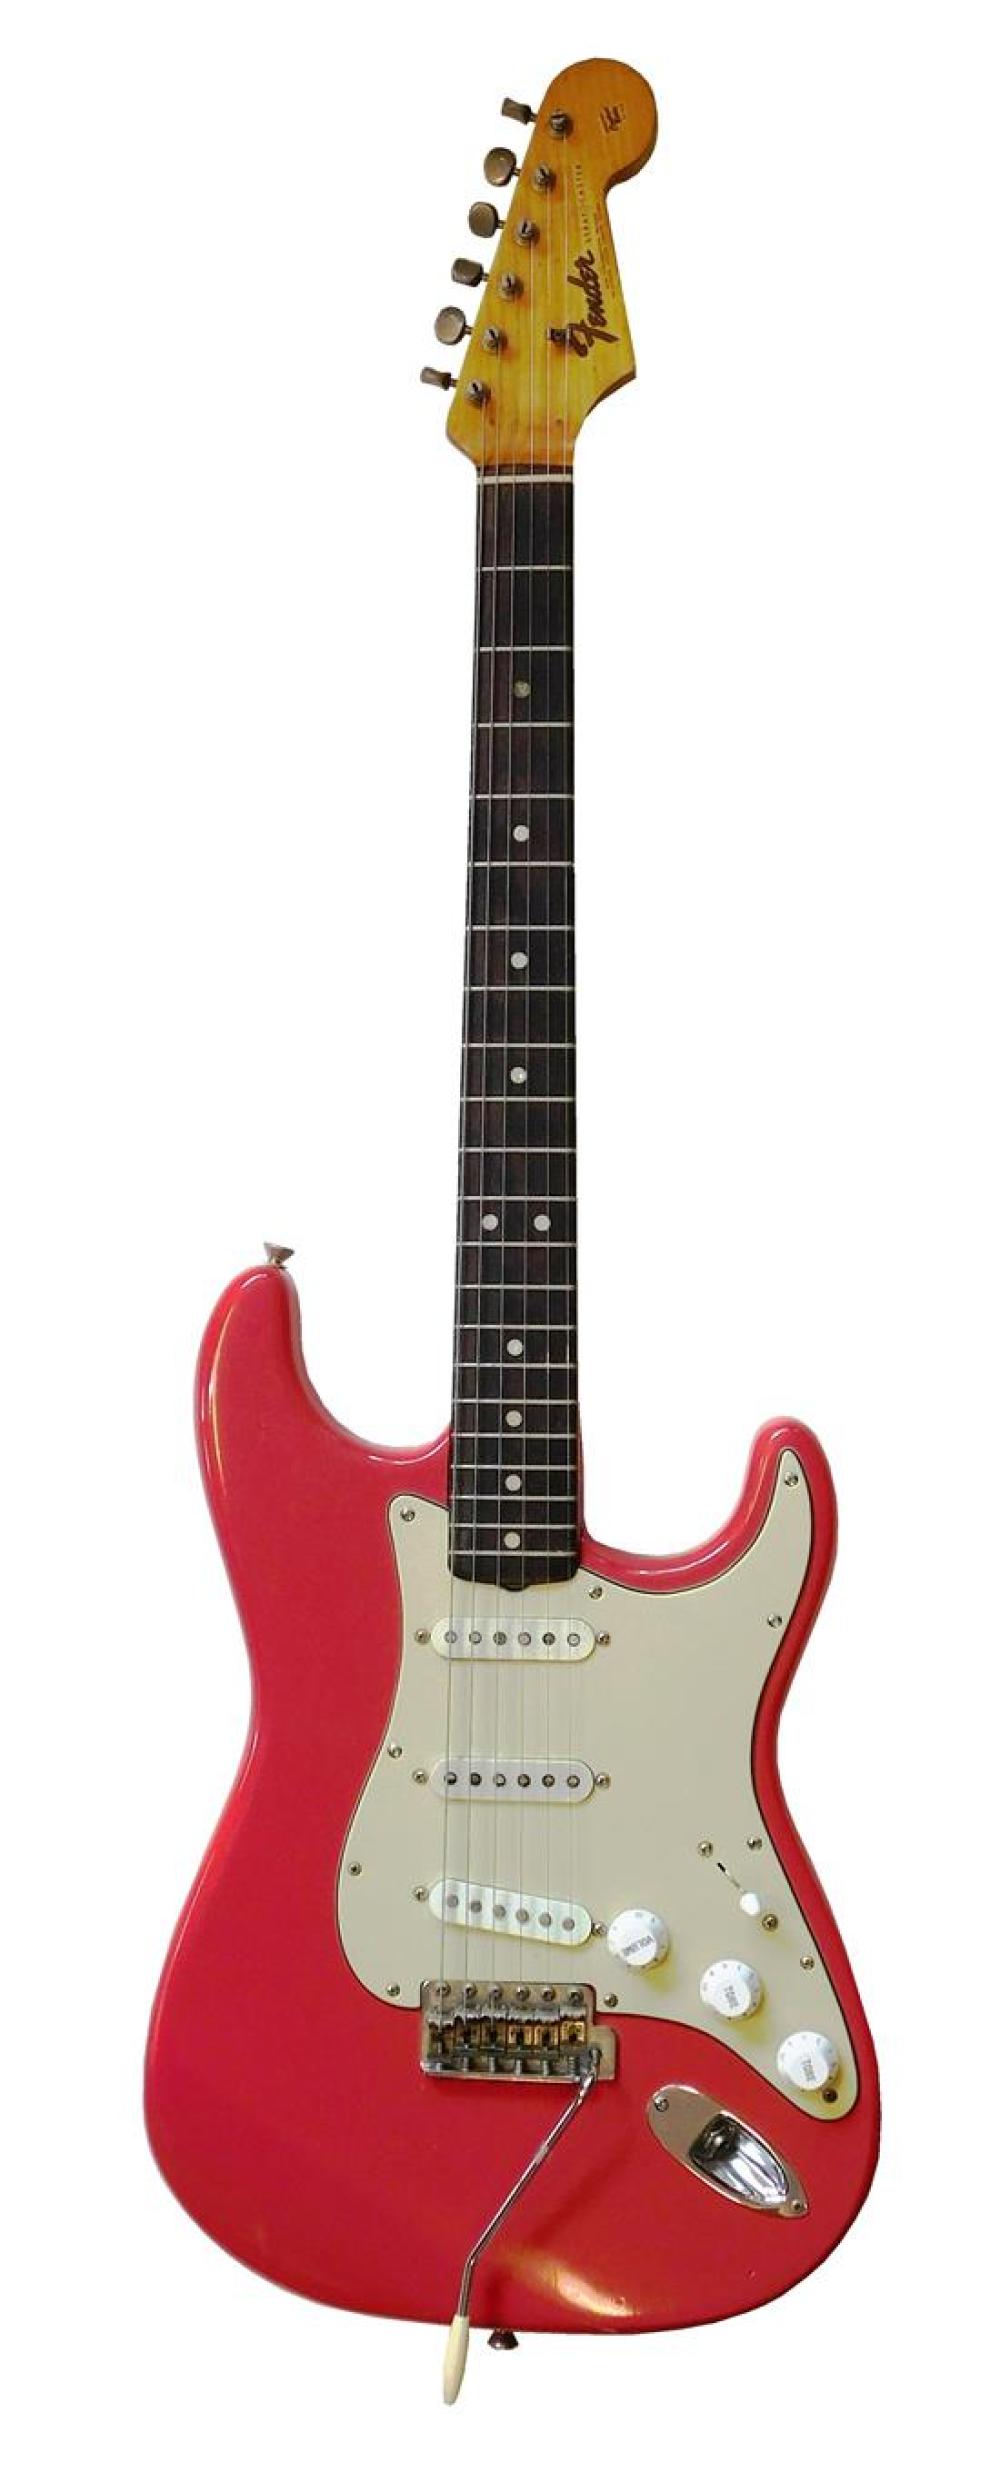 1965 FENDER STRATOCASTER ELECTRIC 31bb74